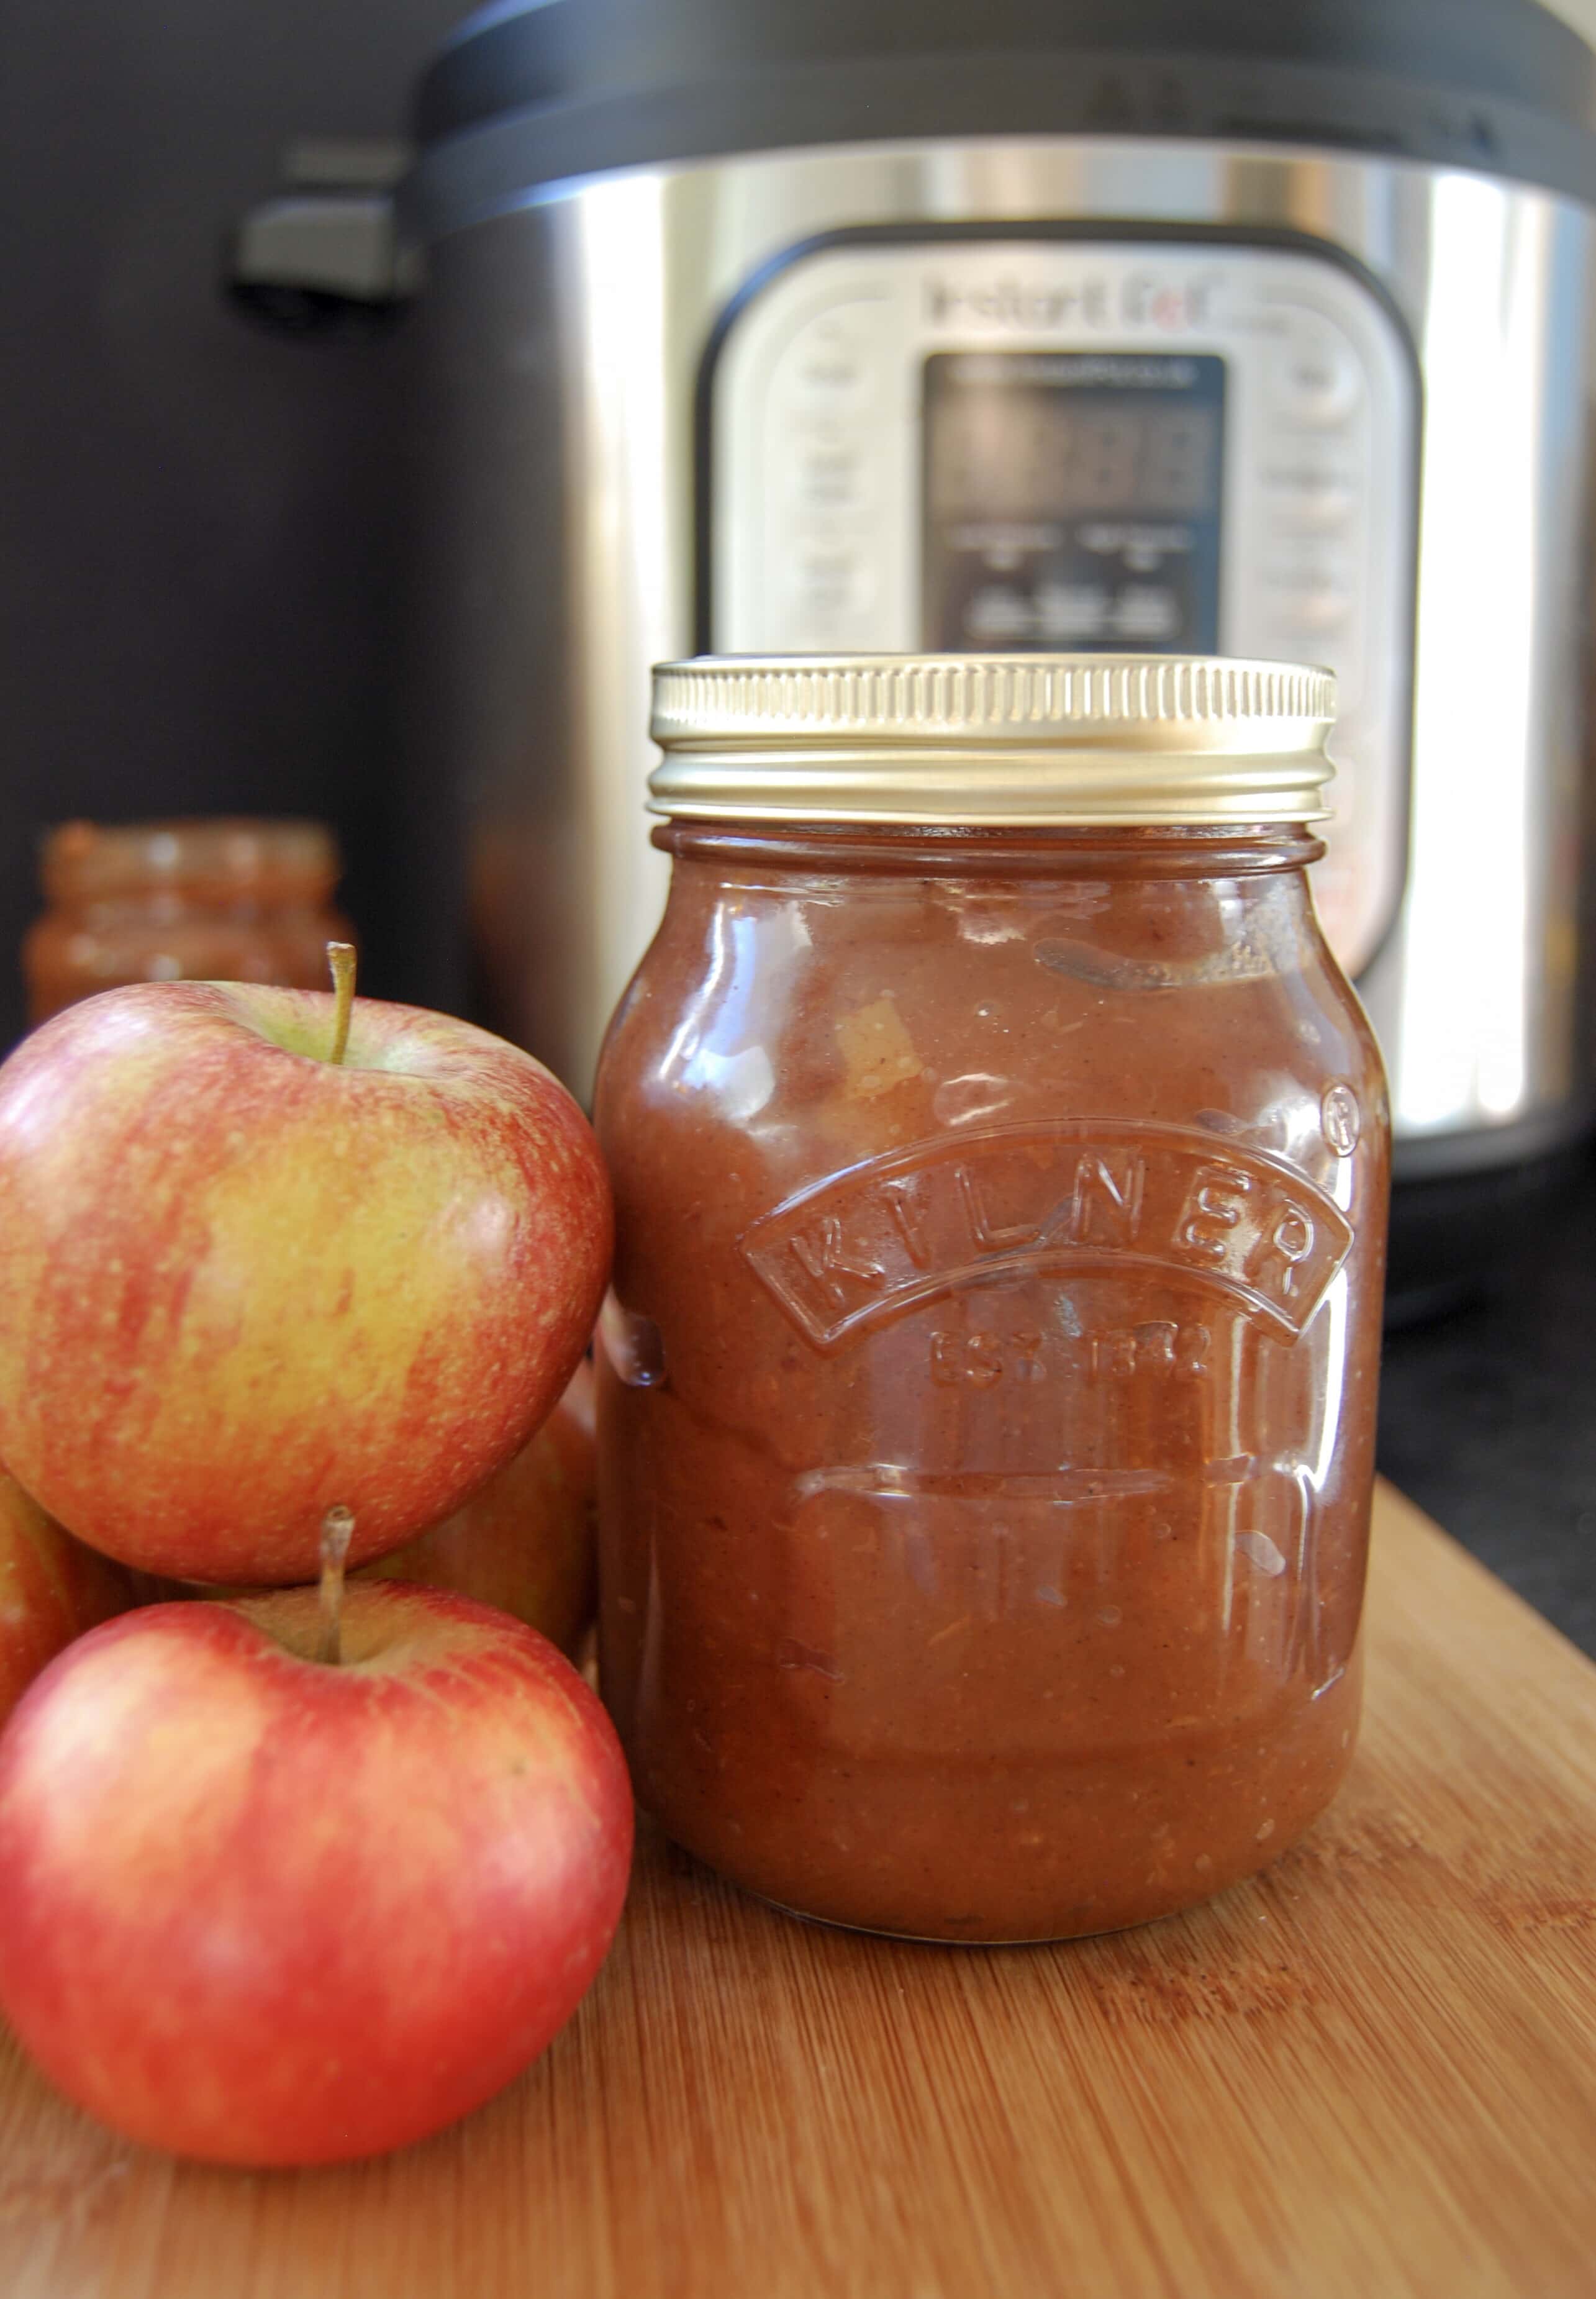 A jar of apple butter and red apples on a wooden board and an Instant Pot in the background